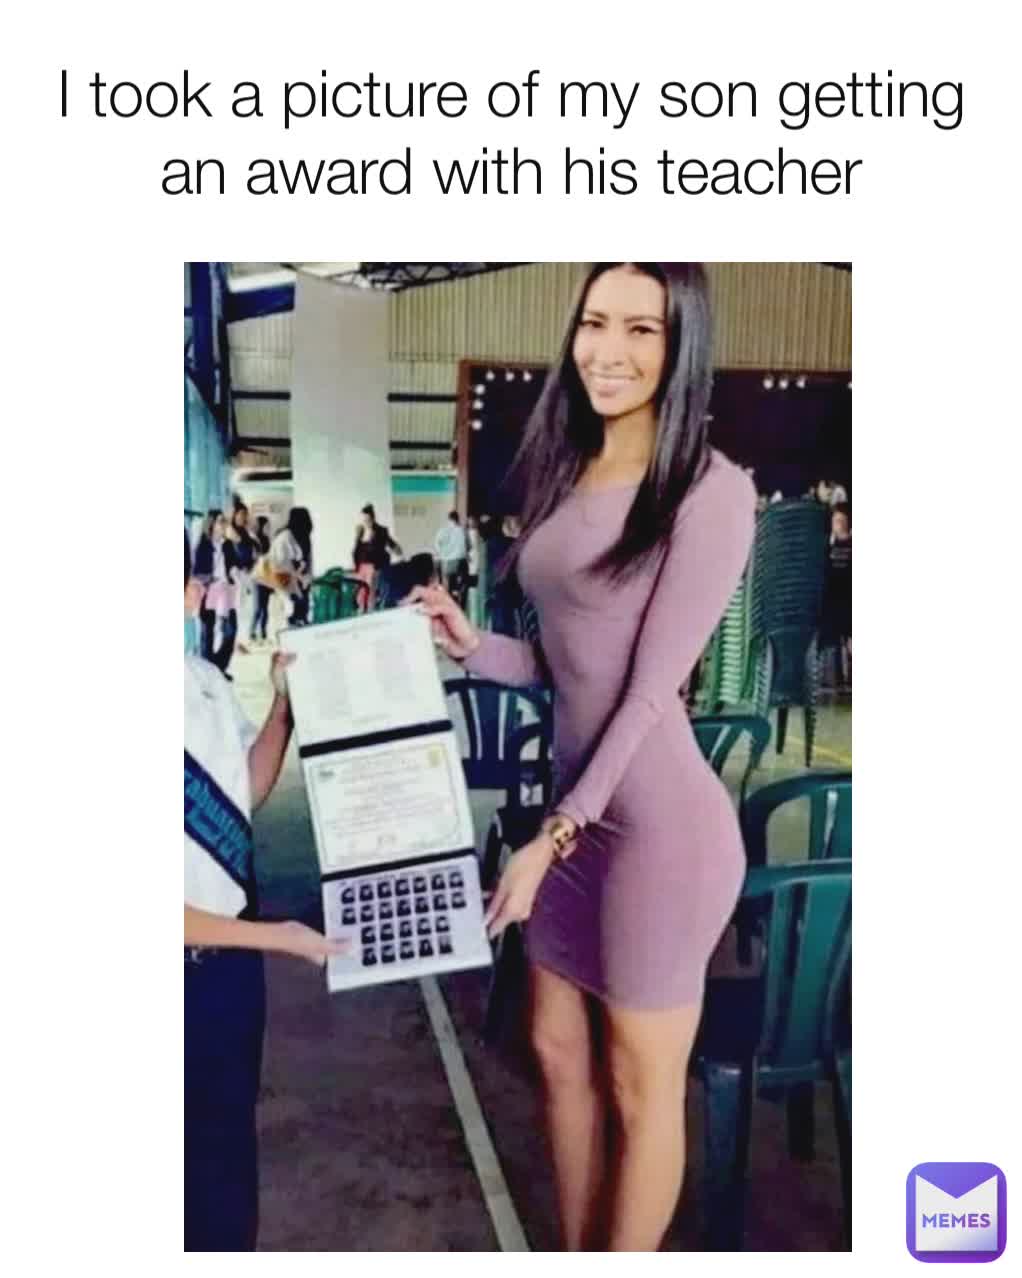 I Took A Picture Of My Son Getting An Award With His Teacher Sande2psingh Memes